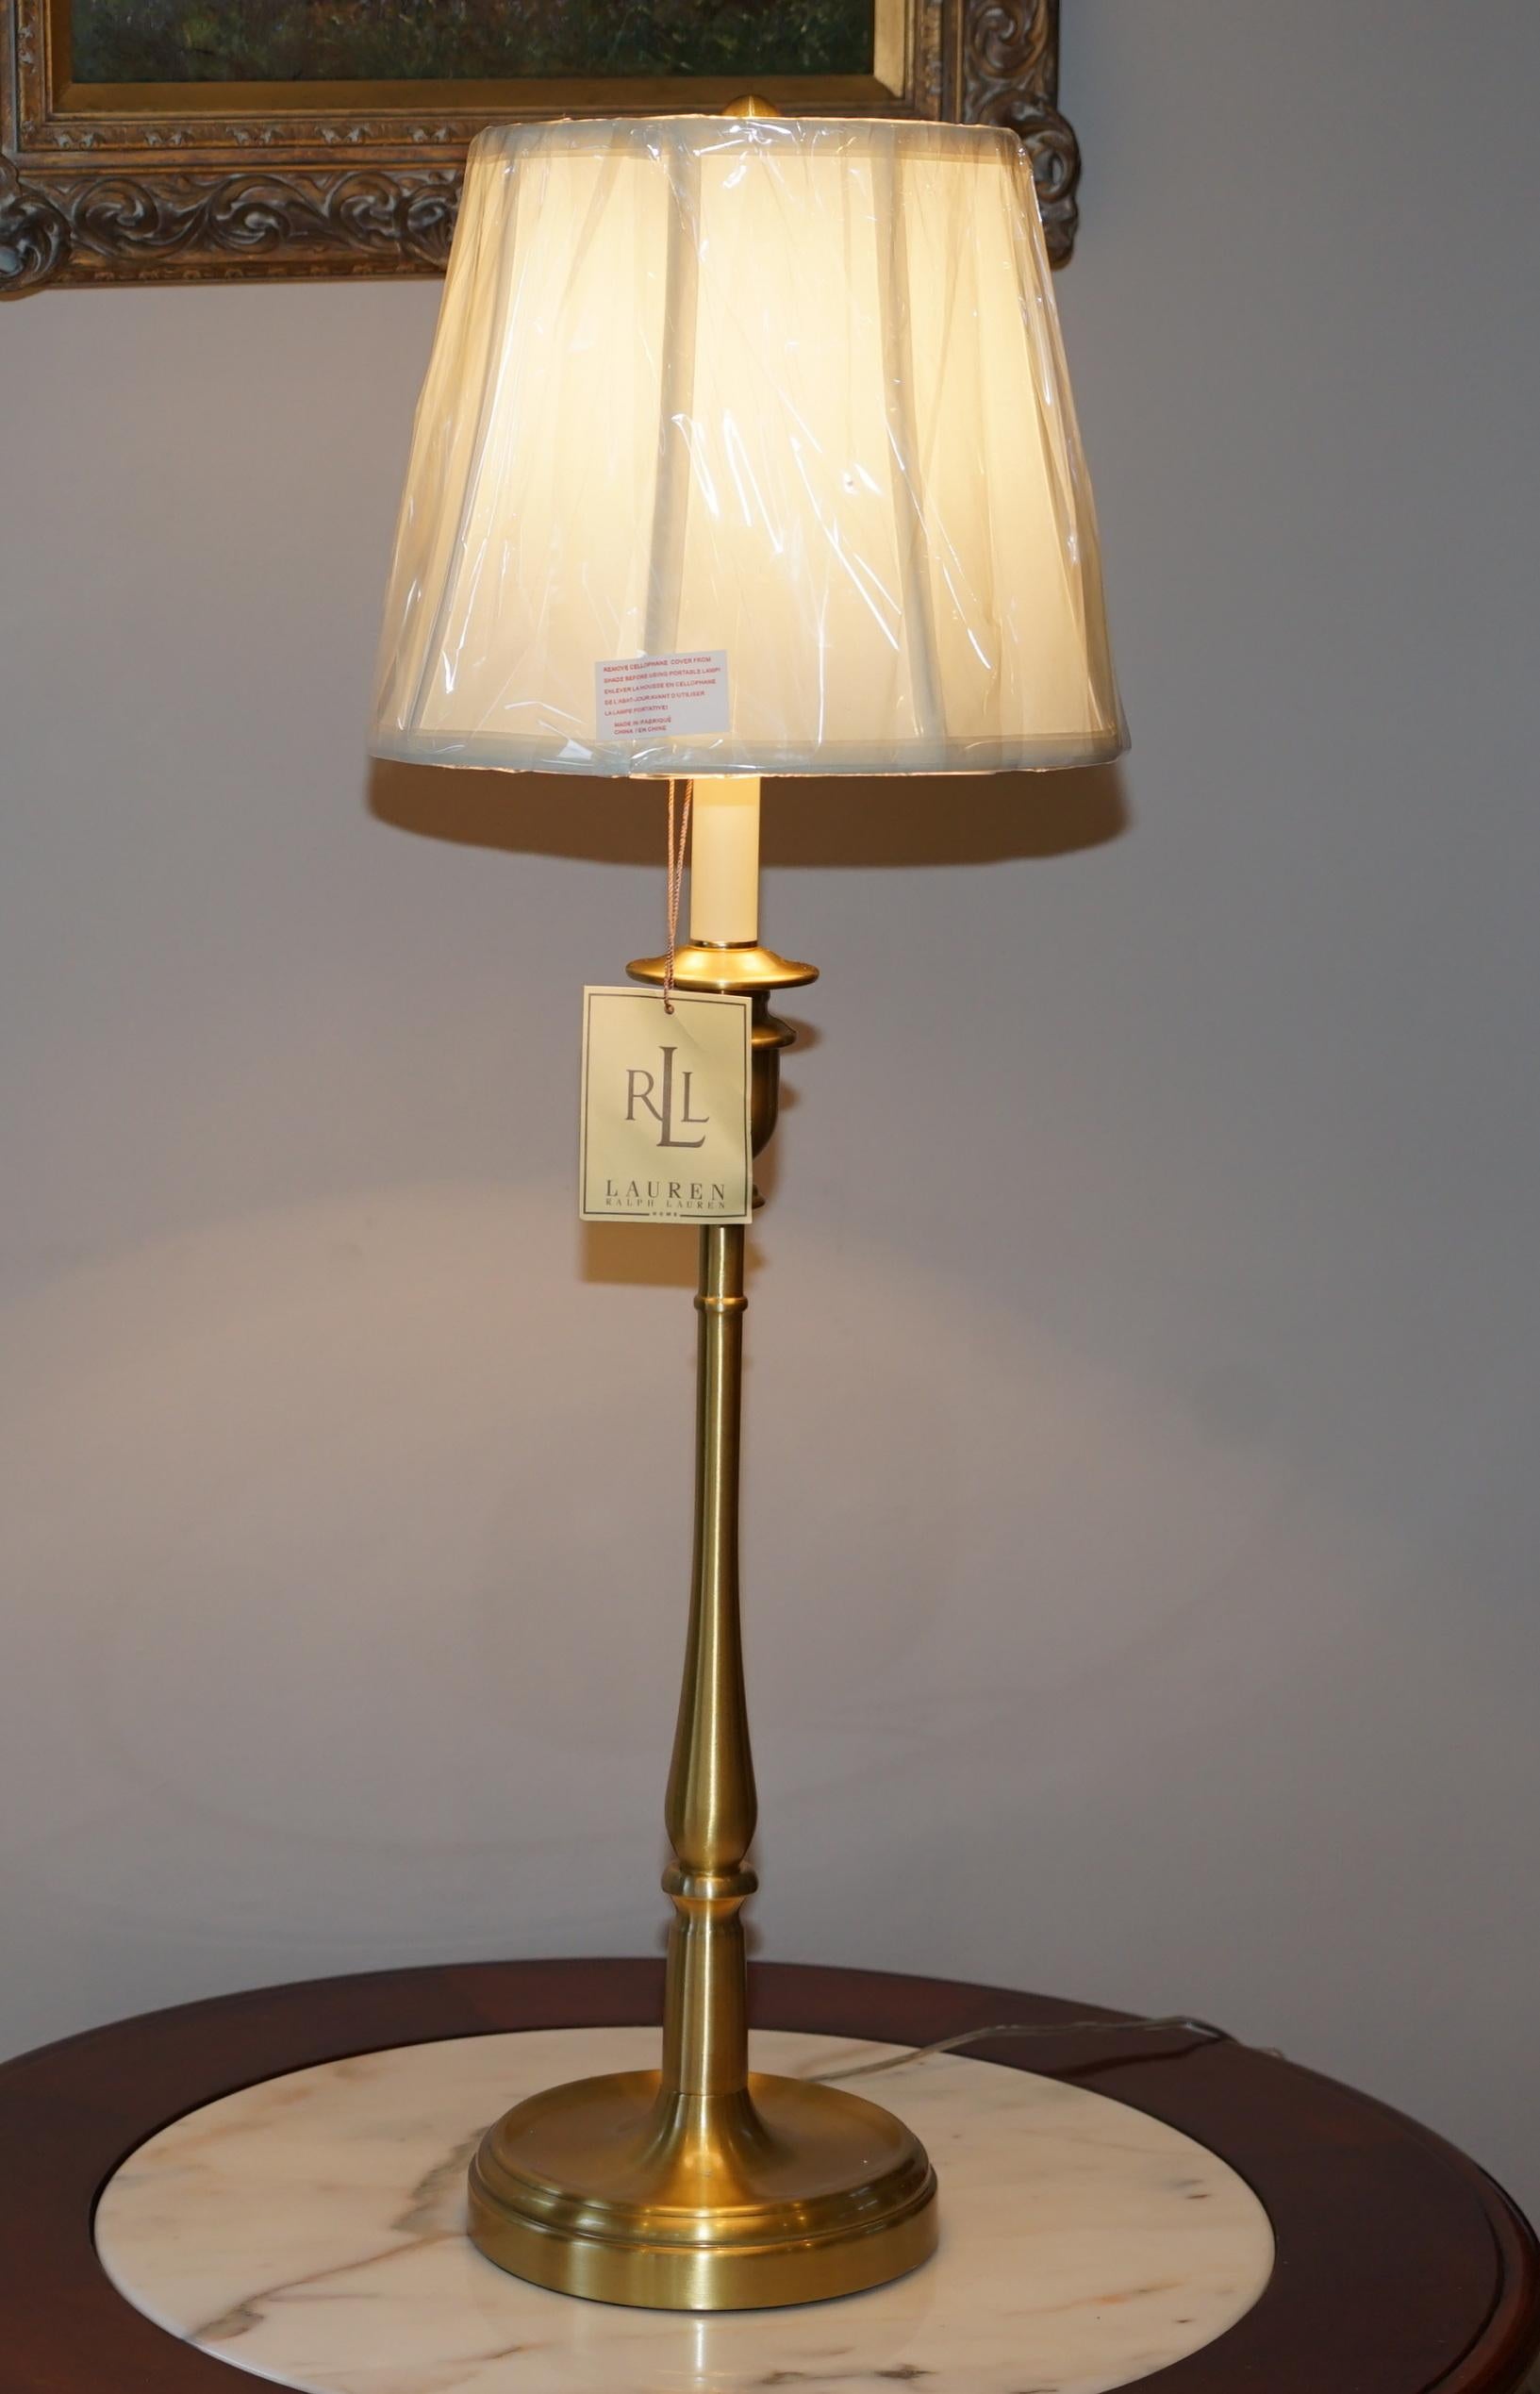 I am delighted to offer for sale one of three brand new in the original box Ralph Lauren brass finish tall candlestick lamp with original shade

I have a number of brand new Ralph Lauren rugs and lamps in stock plus various Tommy Hilfiger bedding